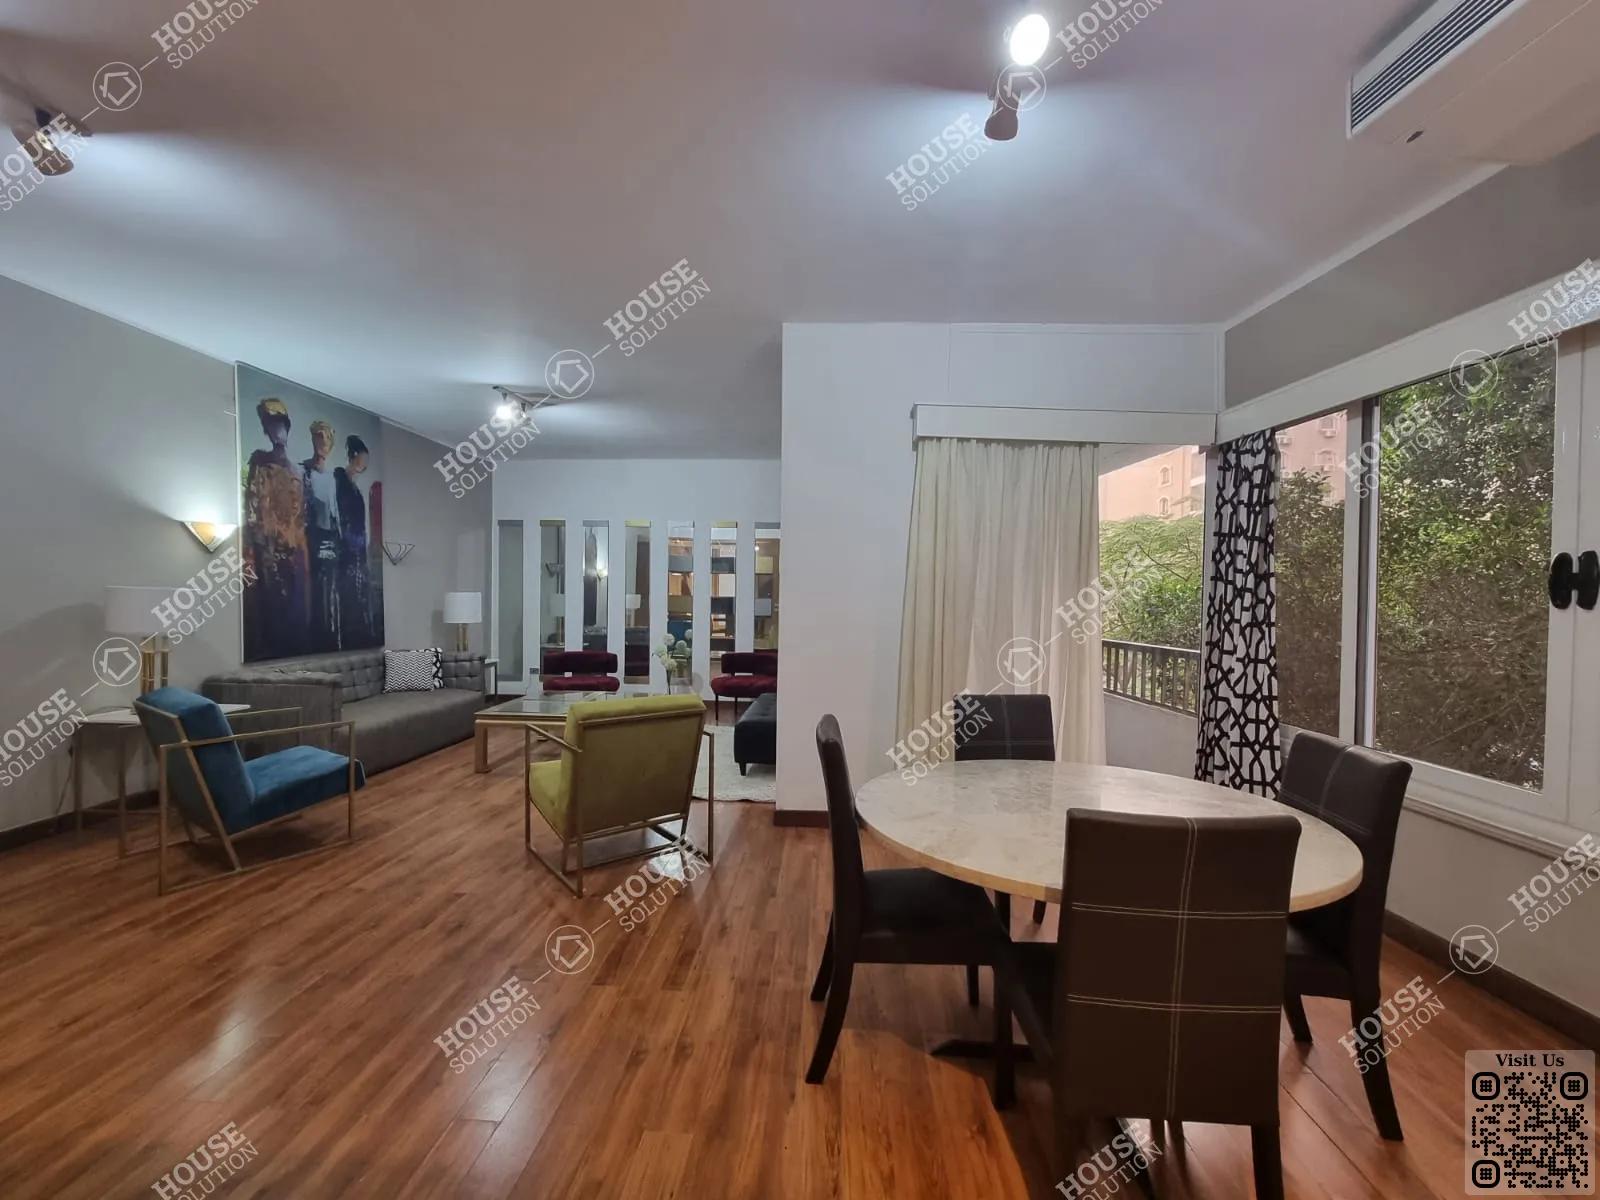 RECEPTION  @ Apartments For Rent In Maadi Maadi Degla Area: 280 m² consists of 4 Bedrooms 3 Bathrooms Modern furnished 5 stars #3969-0